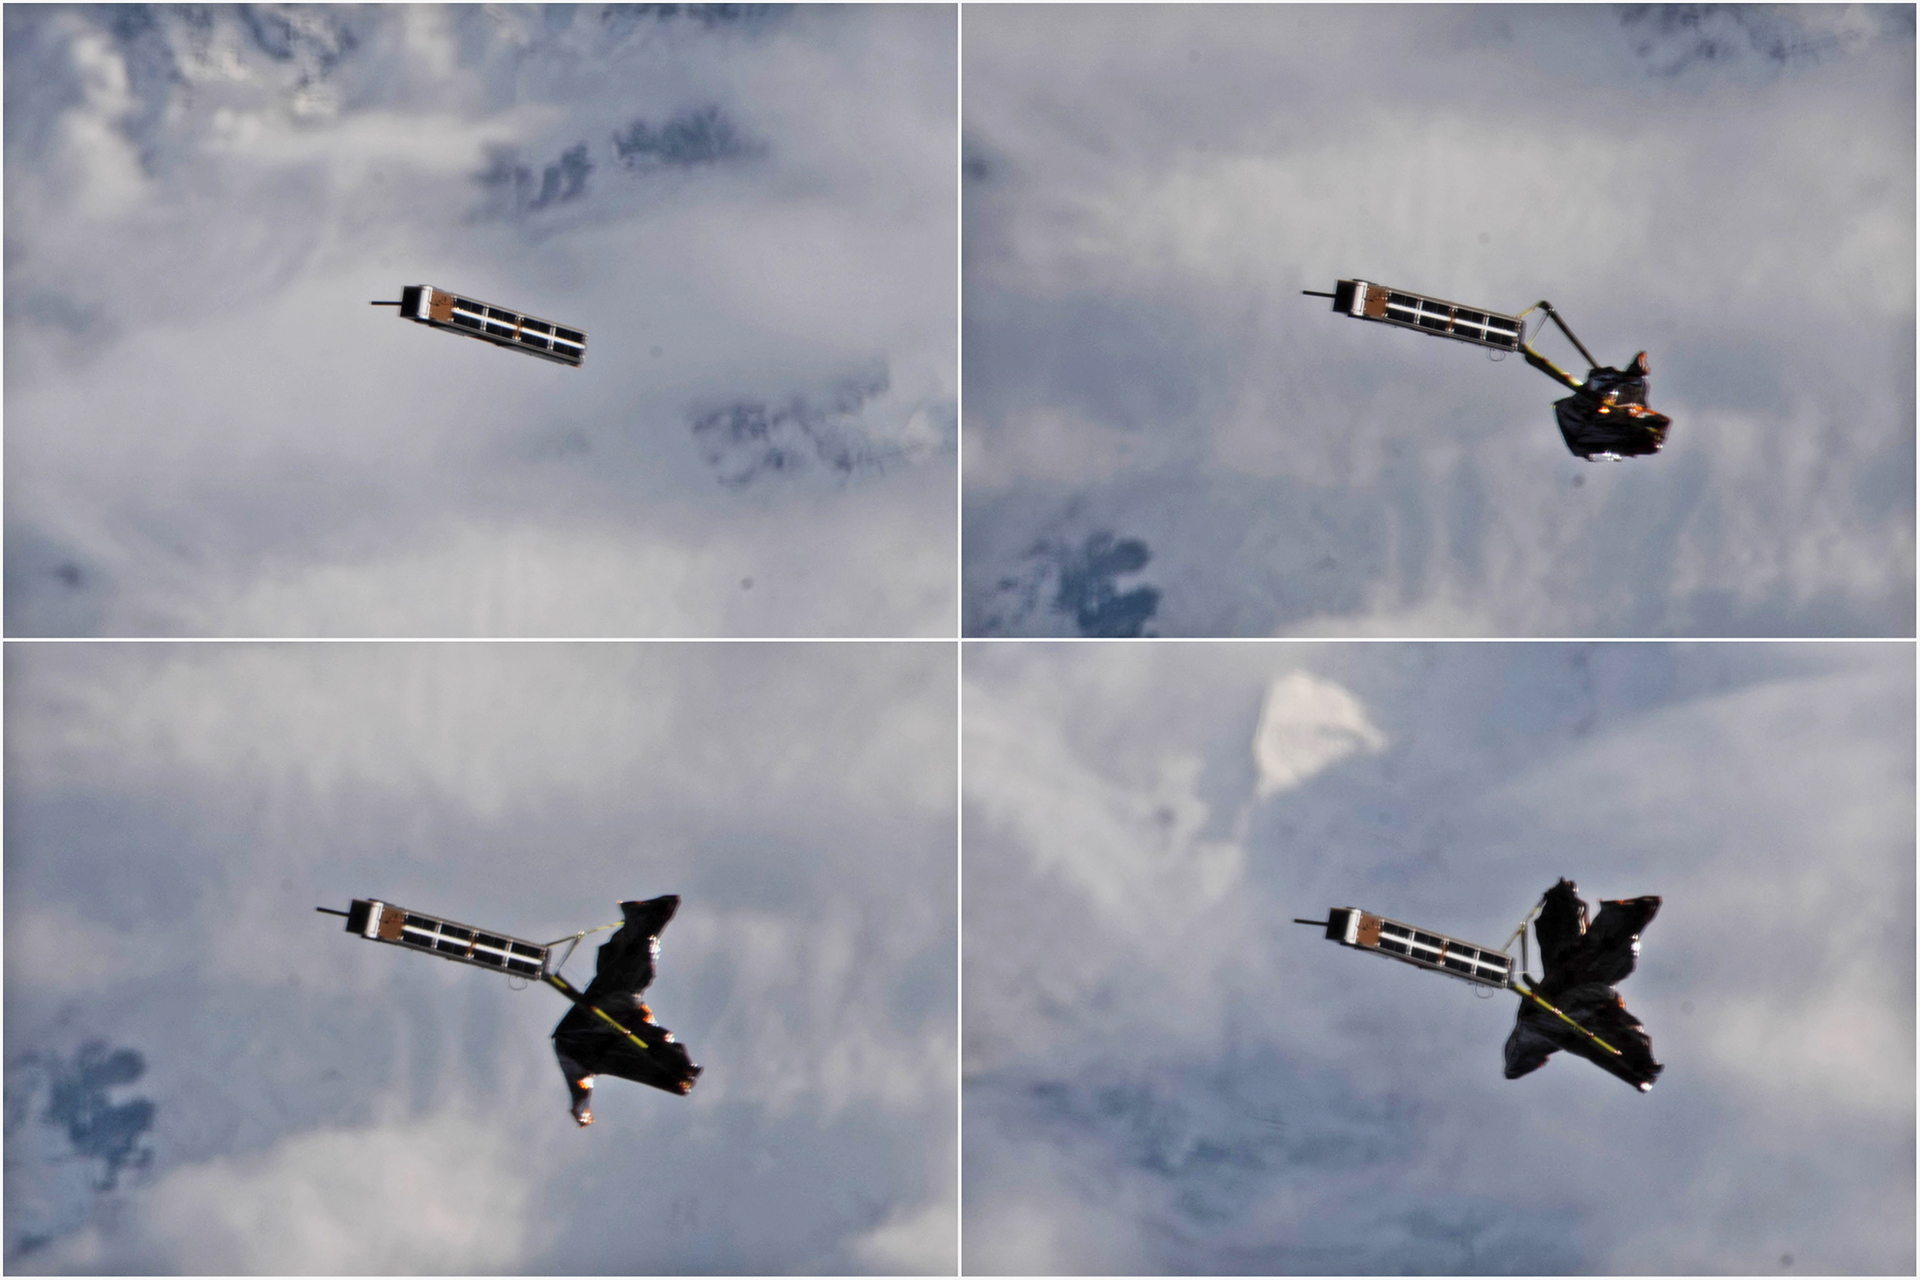 Four images showing the deployment of a small, umbrella-like device attached to a small satellite.